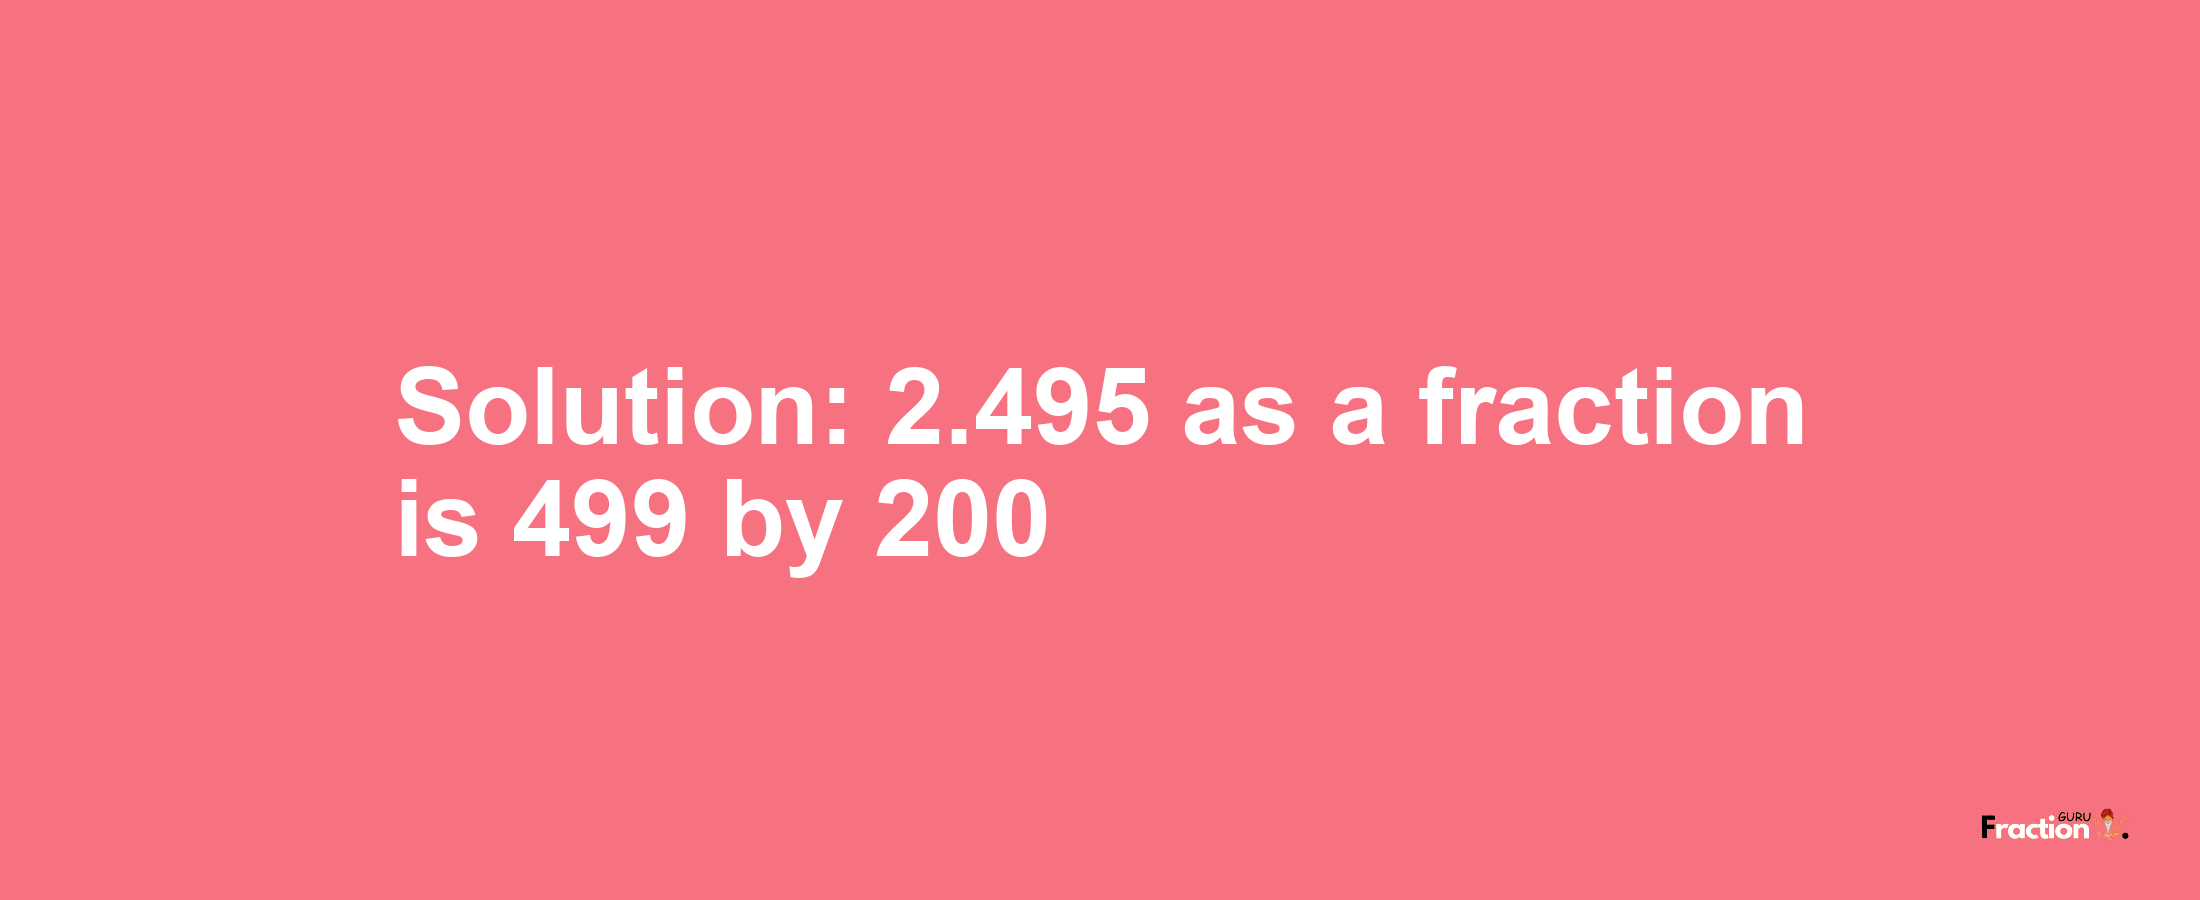 Solution:2.495 as a fraction is 499/200